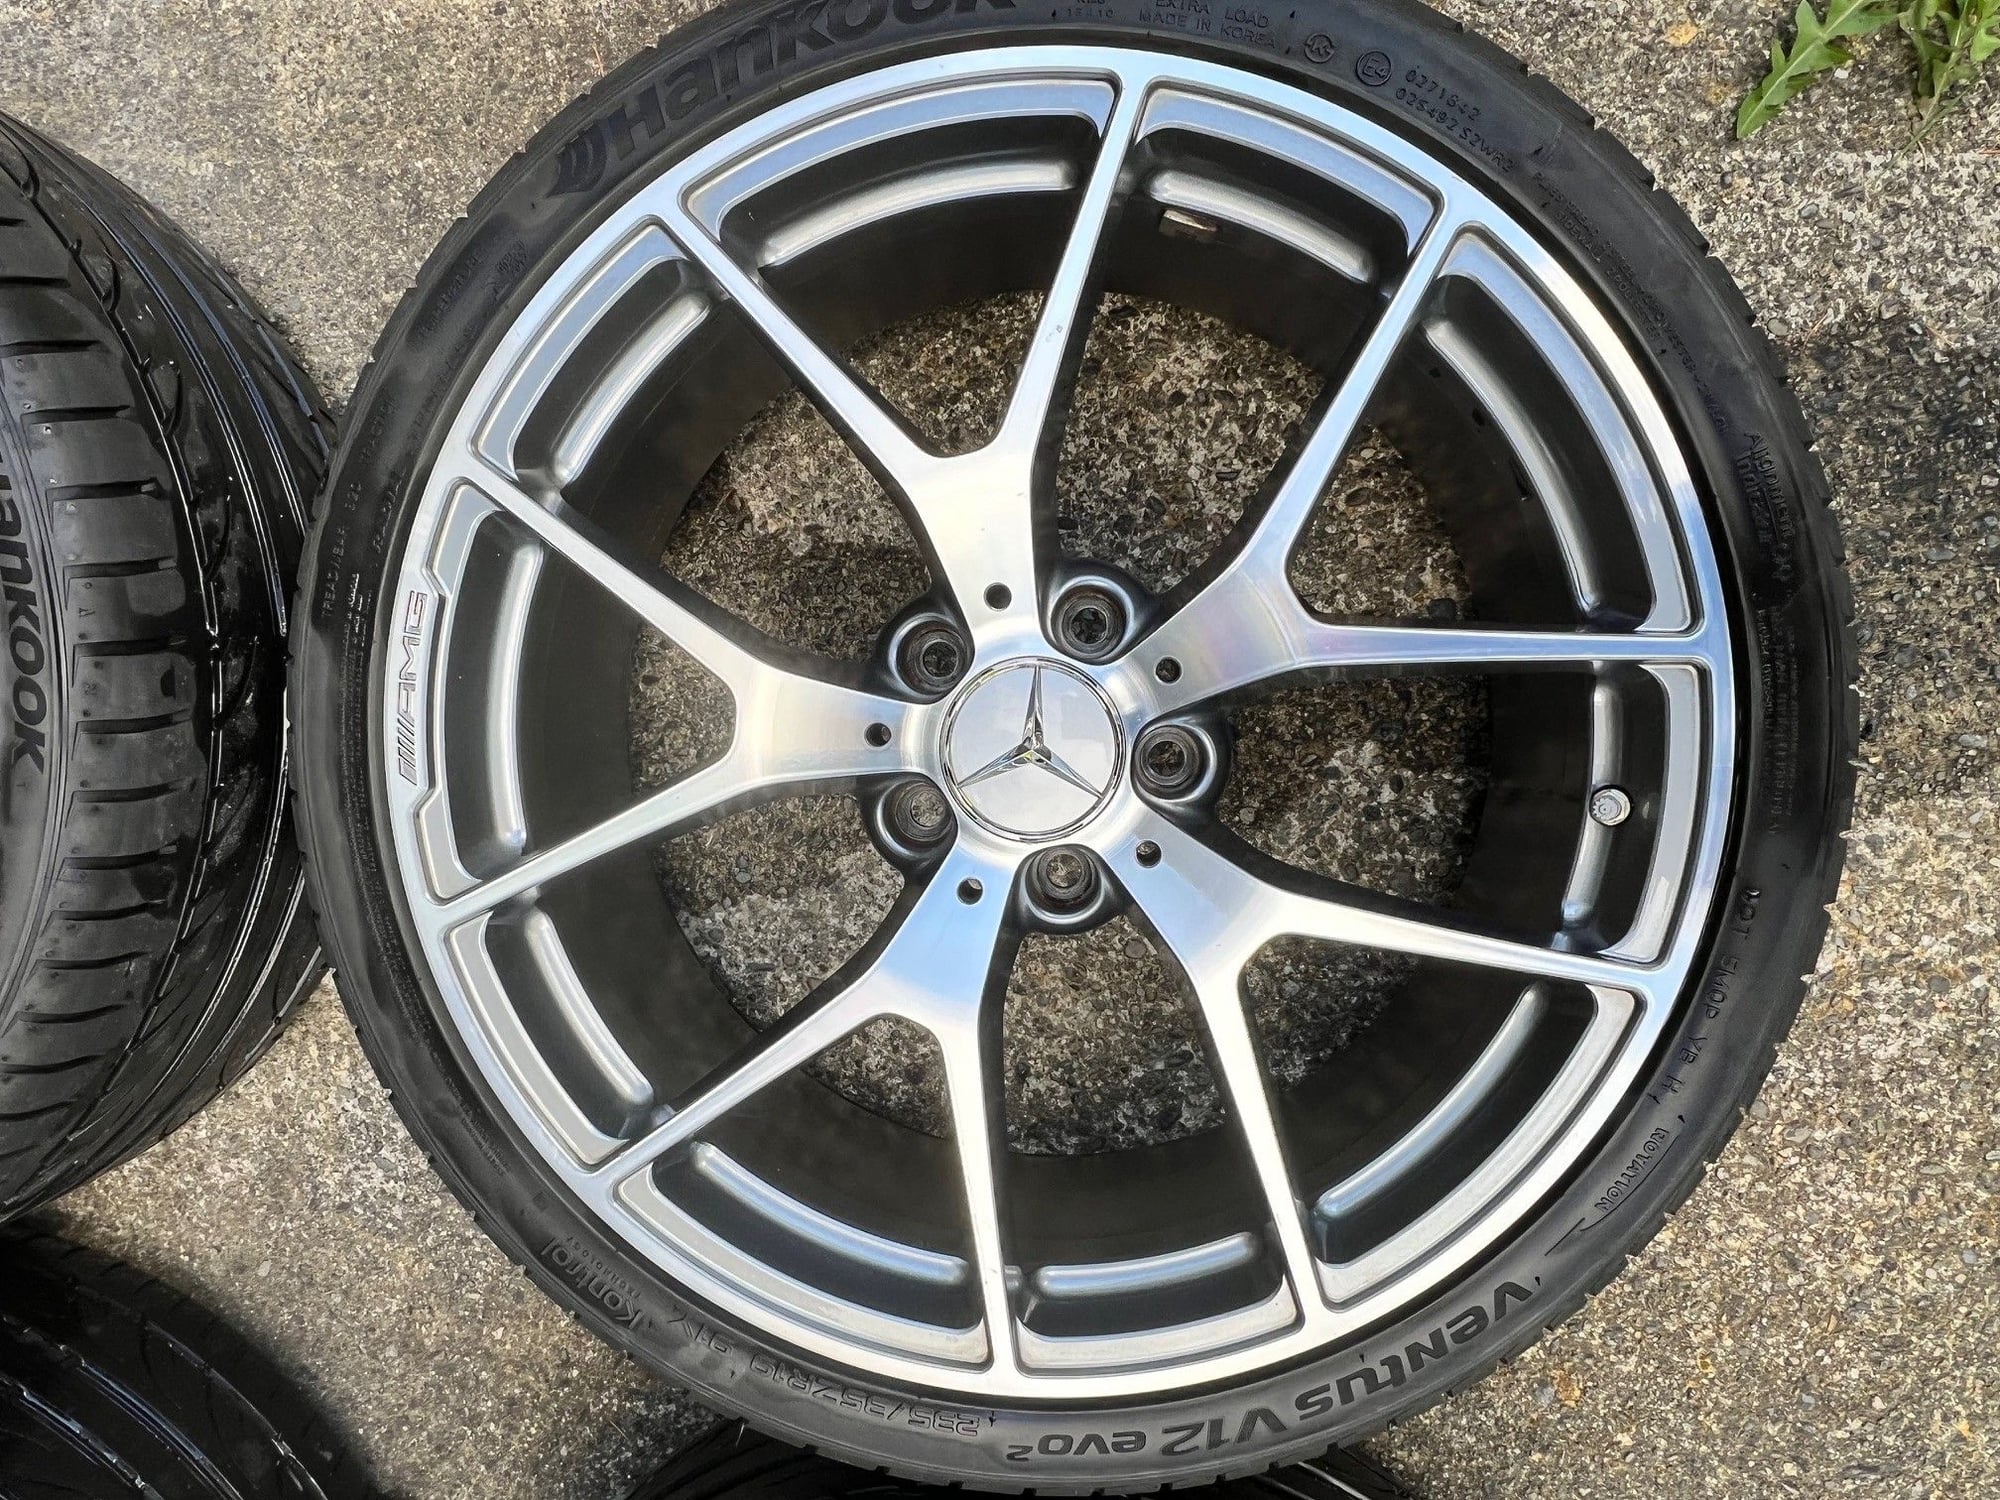 Wheels and Tires/Axles - OEM C63 AMG 507 Edition Silver Wheels - Used - 2009 to 2014 Mercedes-Benz C63 AMG - Seattle, WA 98166, United States